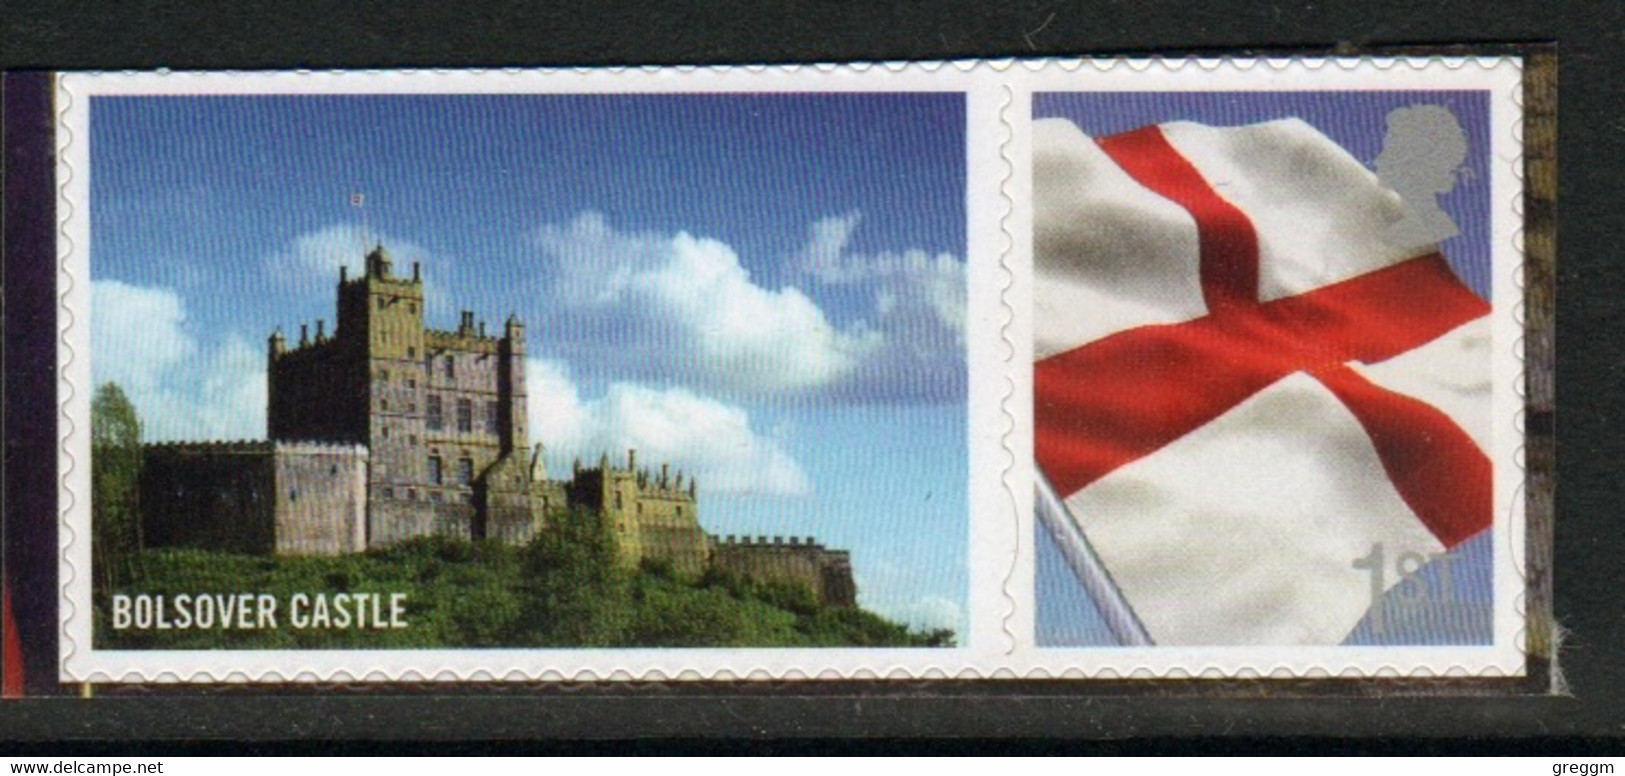 Great Britain 2009 Single Smiler Stamp Celebrating Castles Of England In Unmounted Mint. - Smilers Sheets